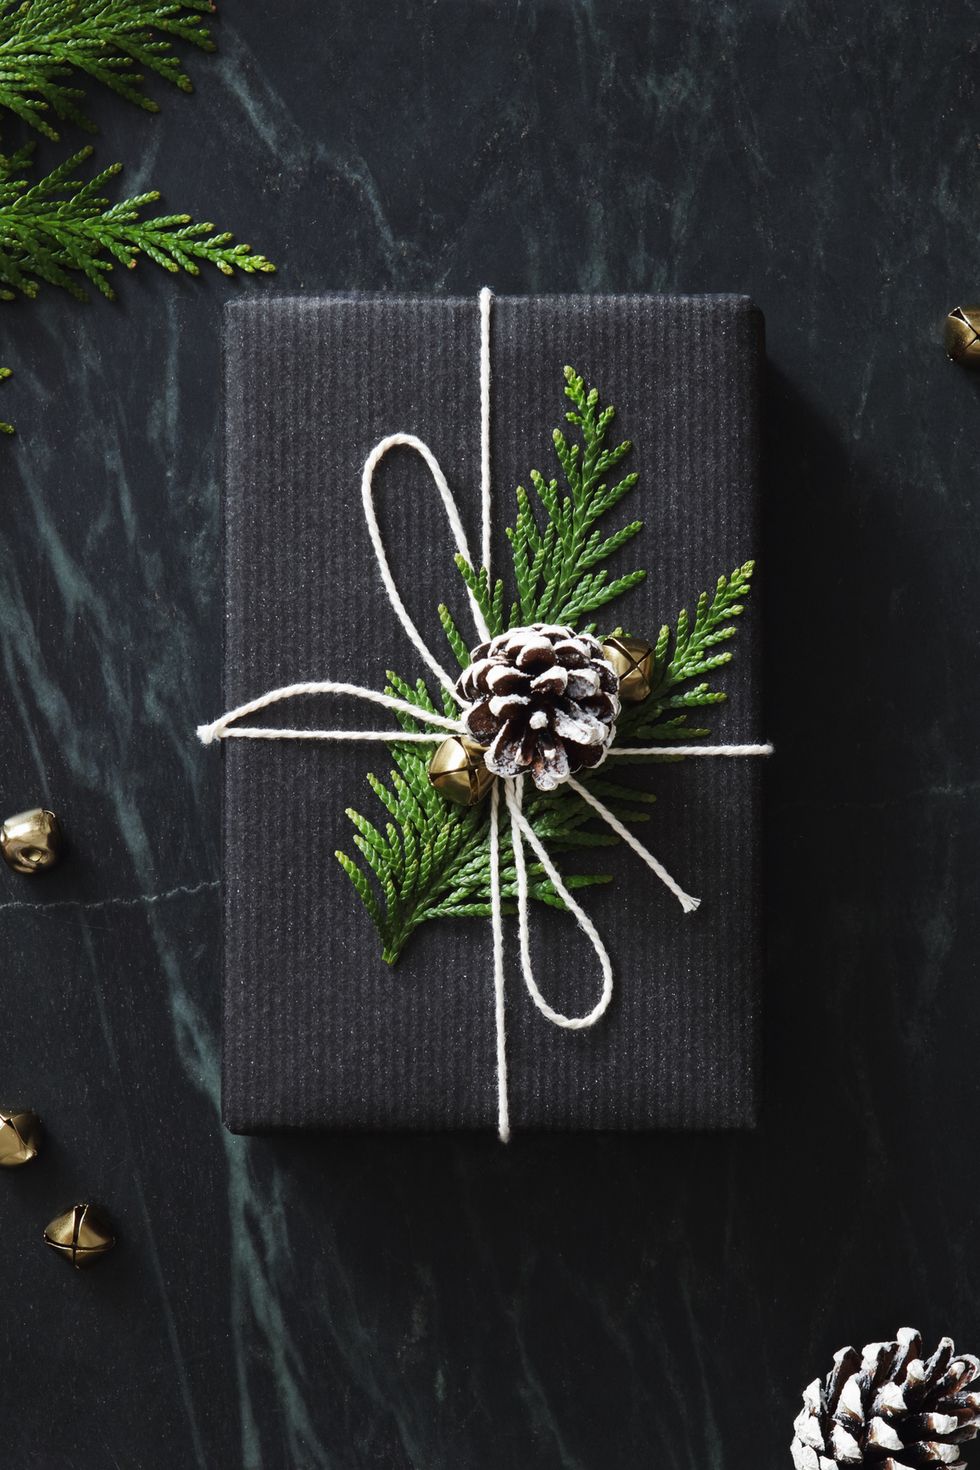 Dark green gift wrapping paper with stars